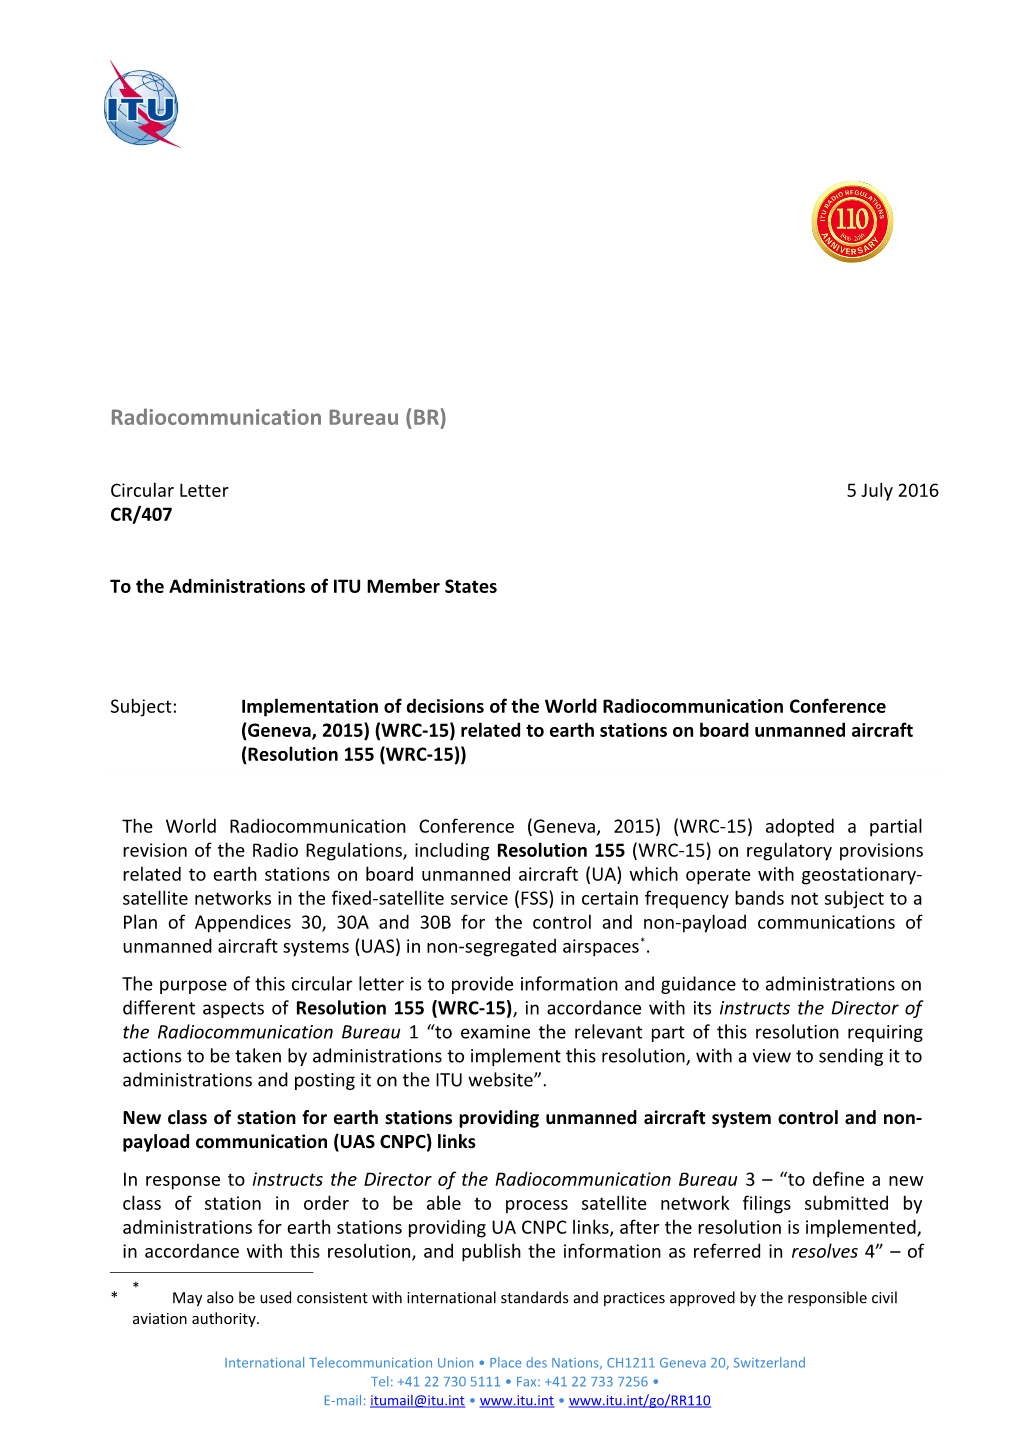 The World Radiocommunication Conference (Geneva, 2015) (WRC-15) Adopted a Partial Revision